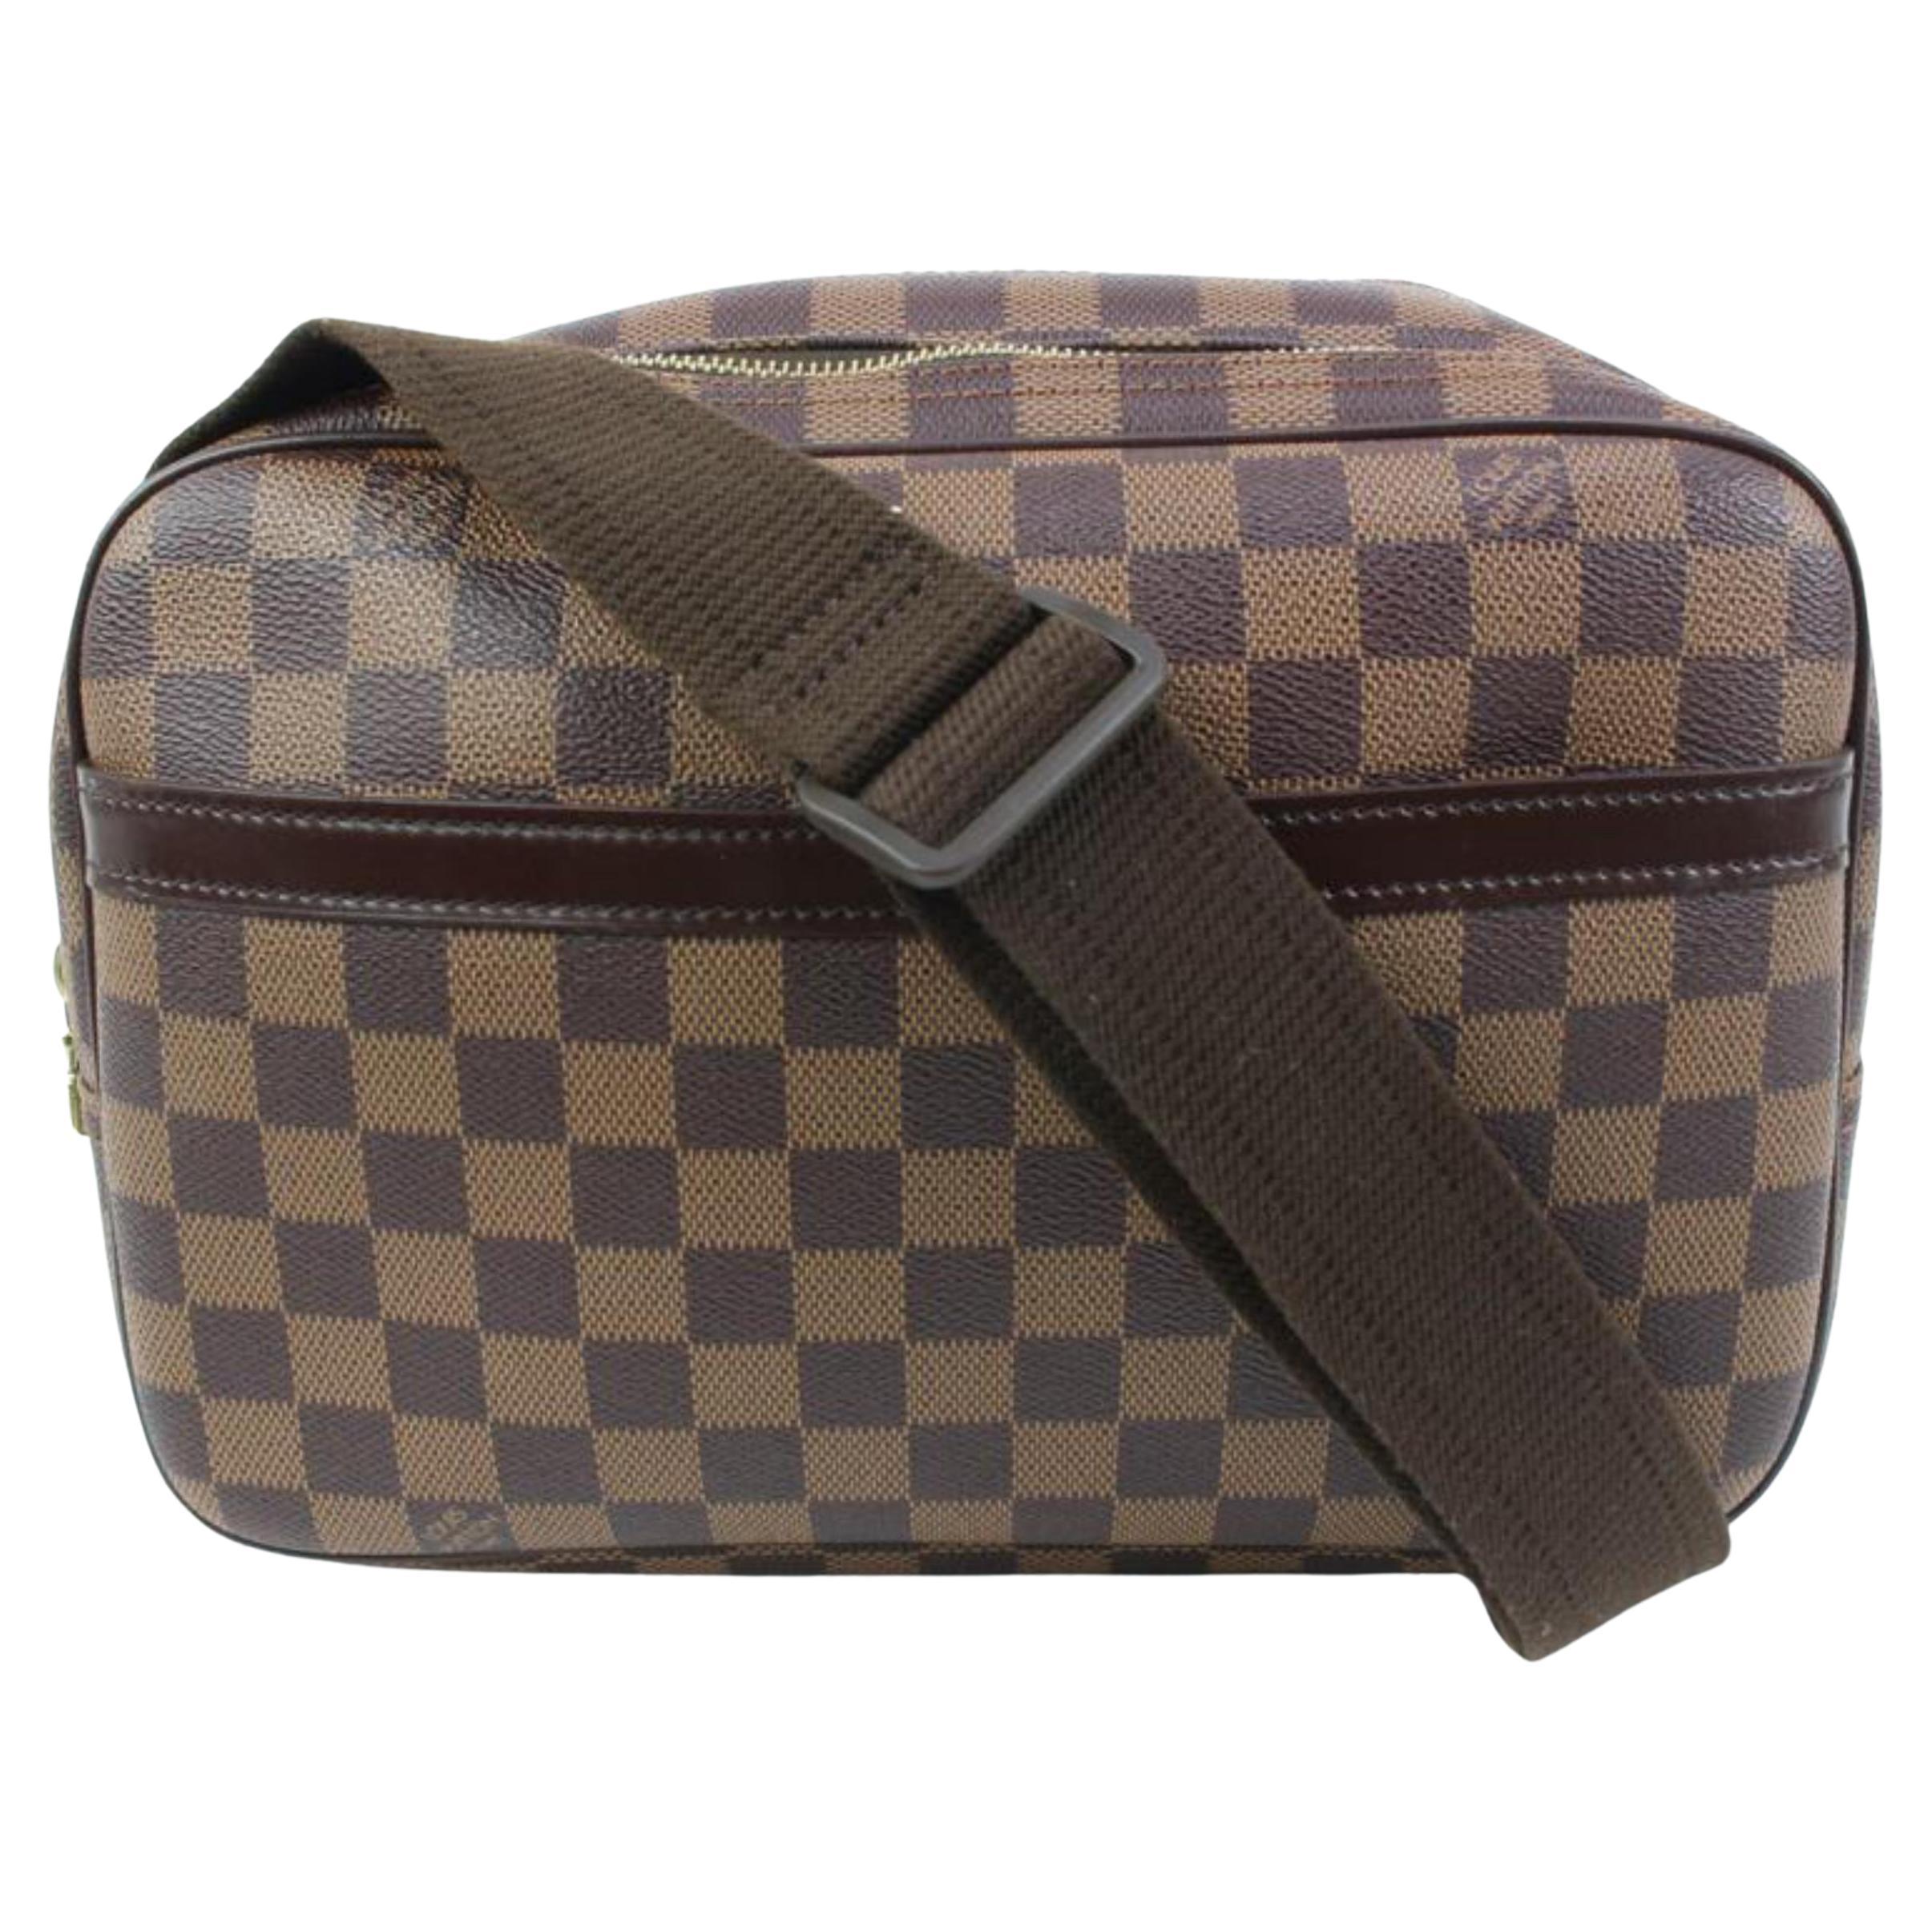 LOUIS VUITTON brown POCHETTE MARLY BANDOULIERE DAMIER Crossbody Bag at  1stDibs